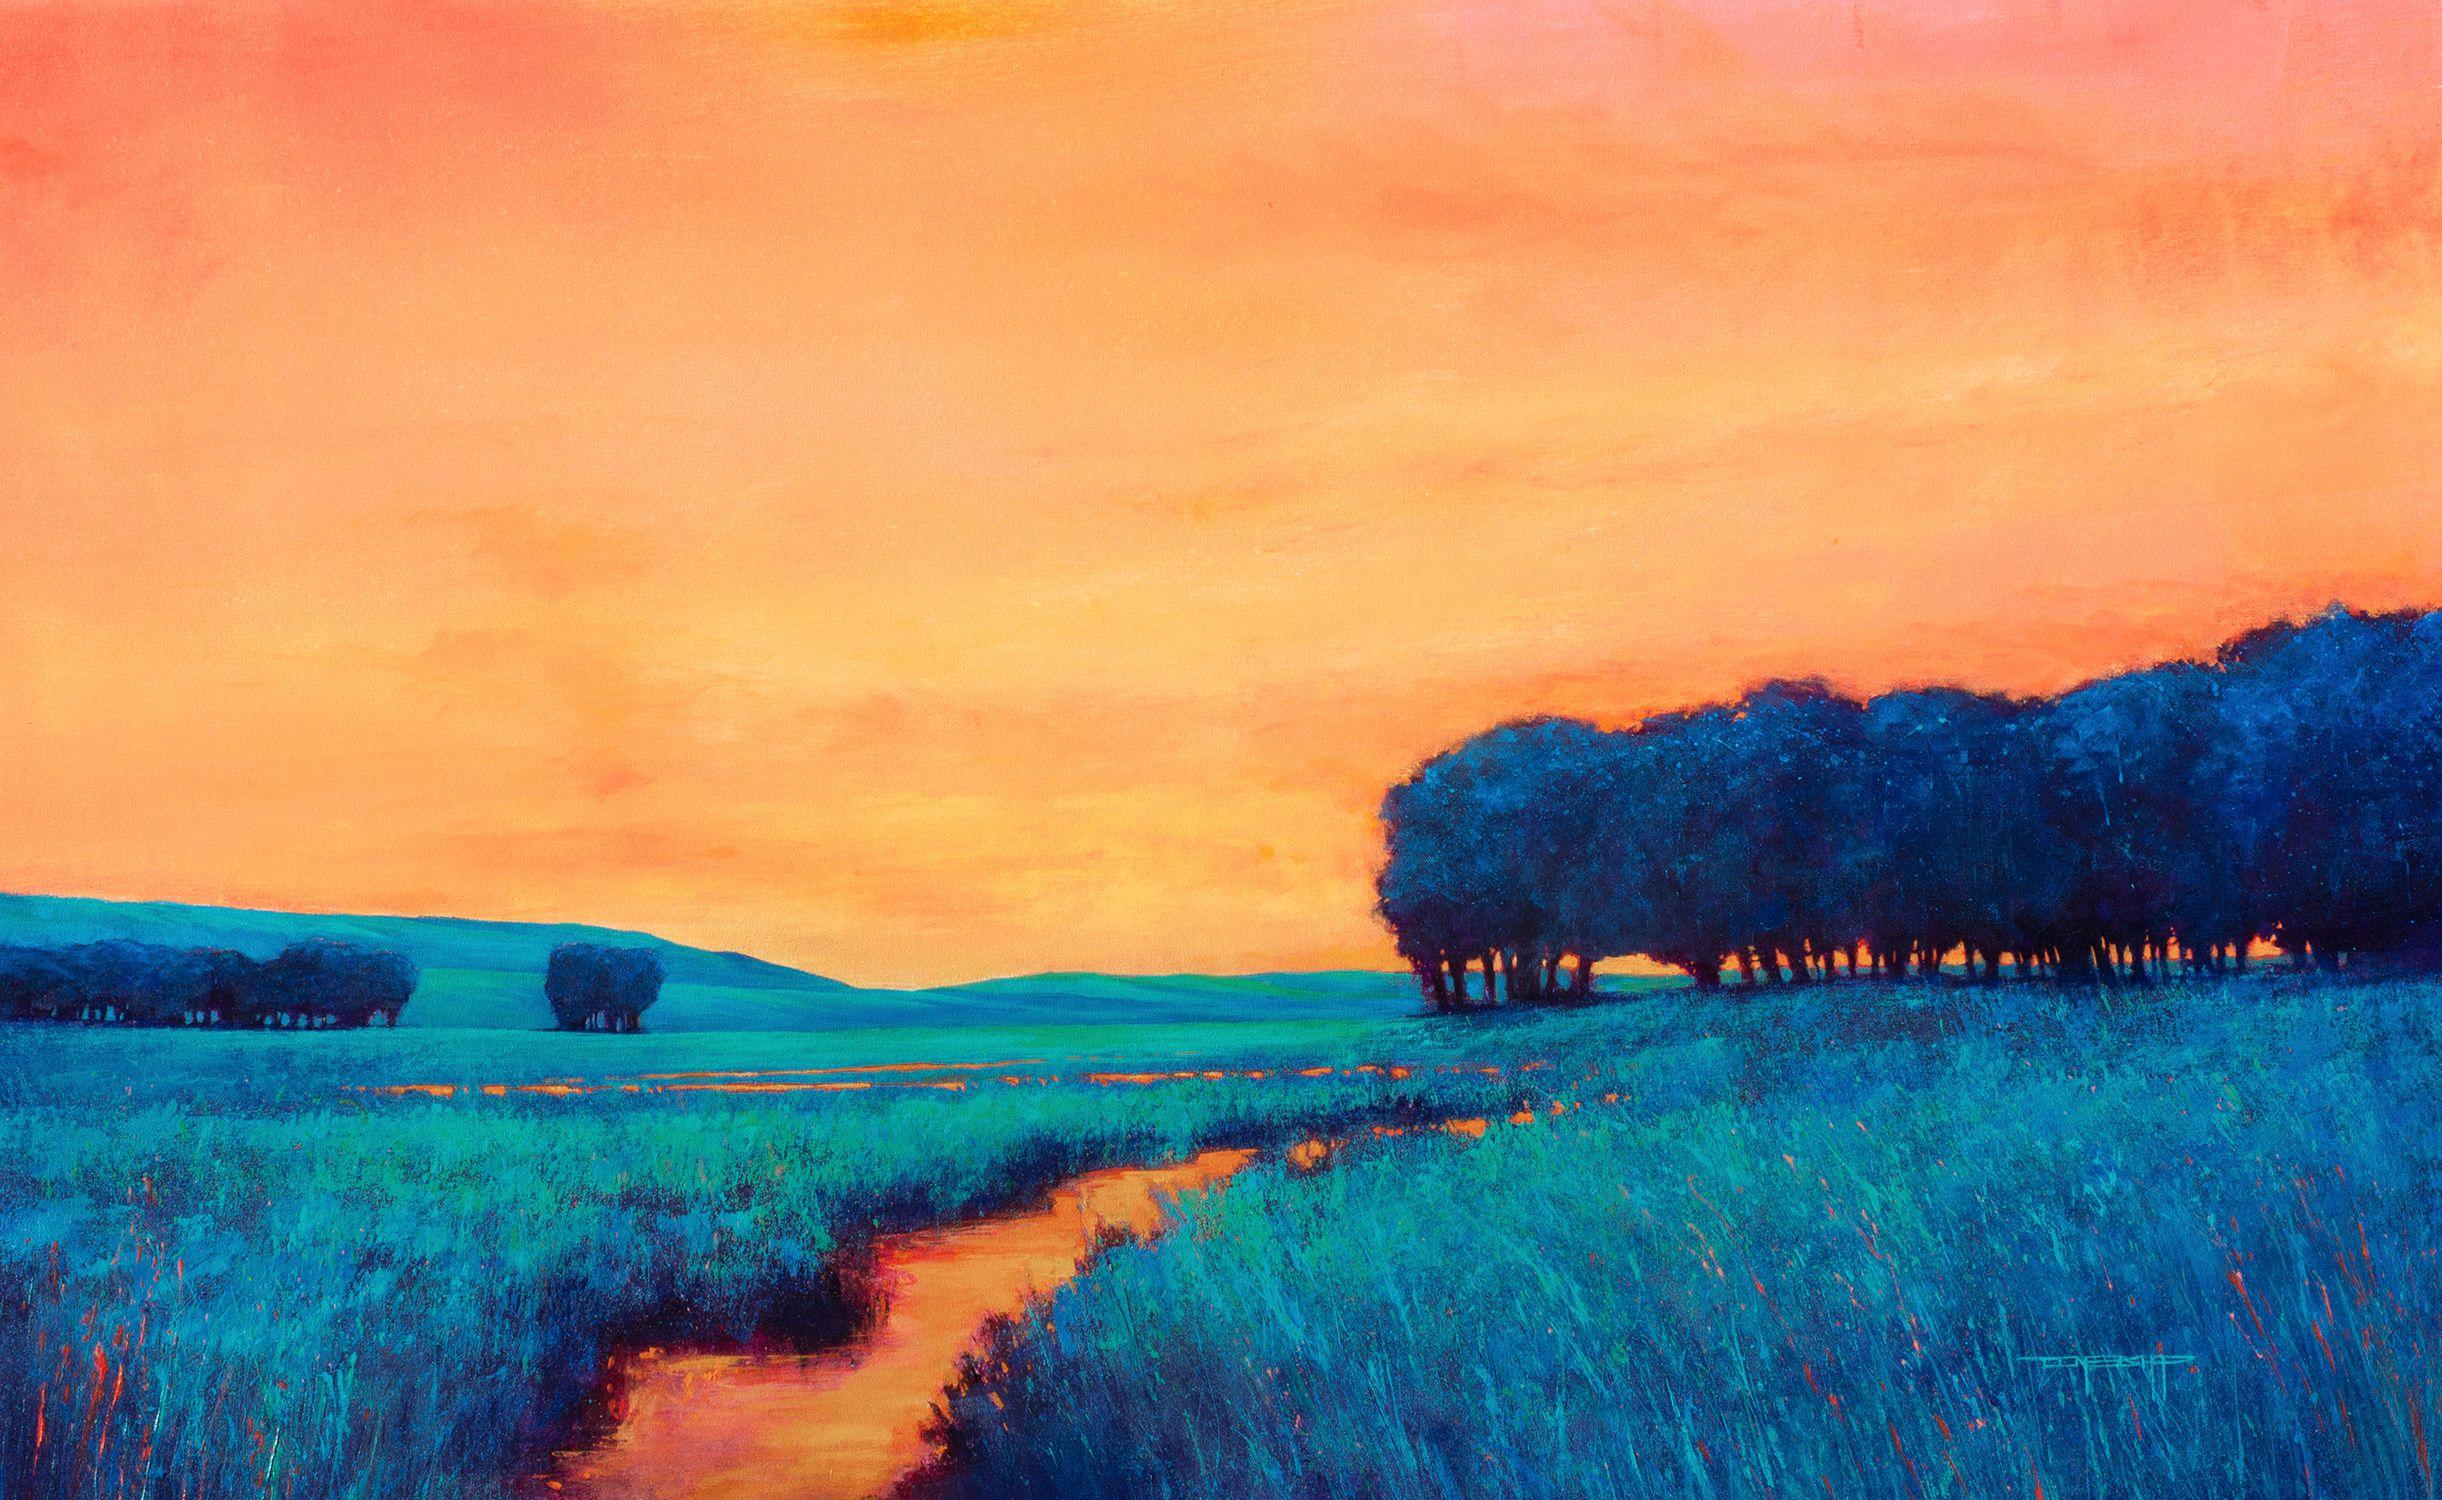 Orange Sunset 221104  Modern jewel tones landscape painting.  24x36 inches.  Orange Sunset 221104 is a modern impressionist landscape painting created with palette knives and non traditional tools. This painting has nice rich jewel tones and glowing